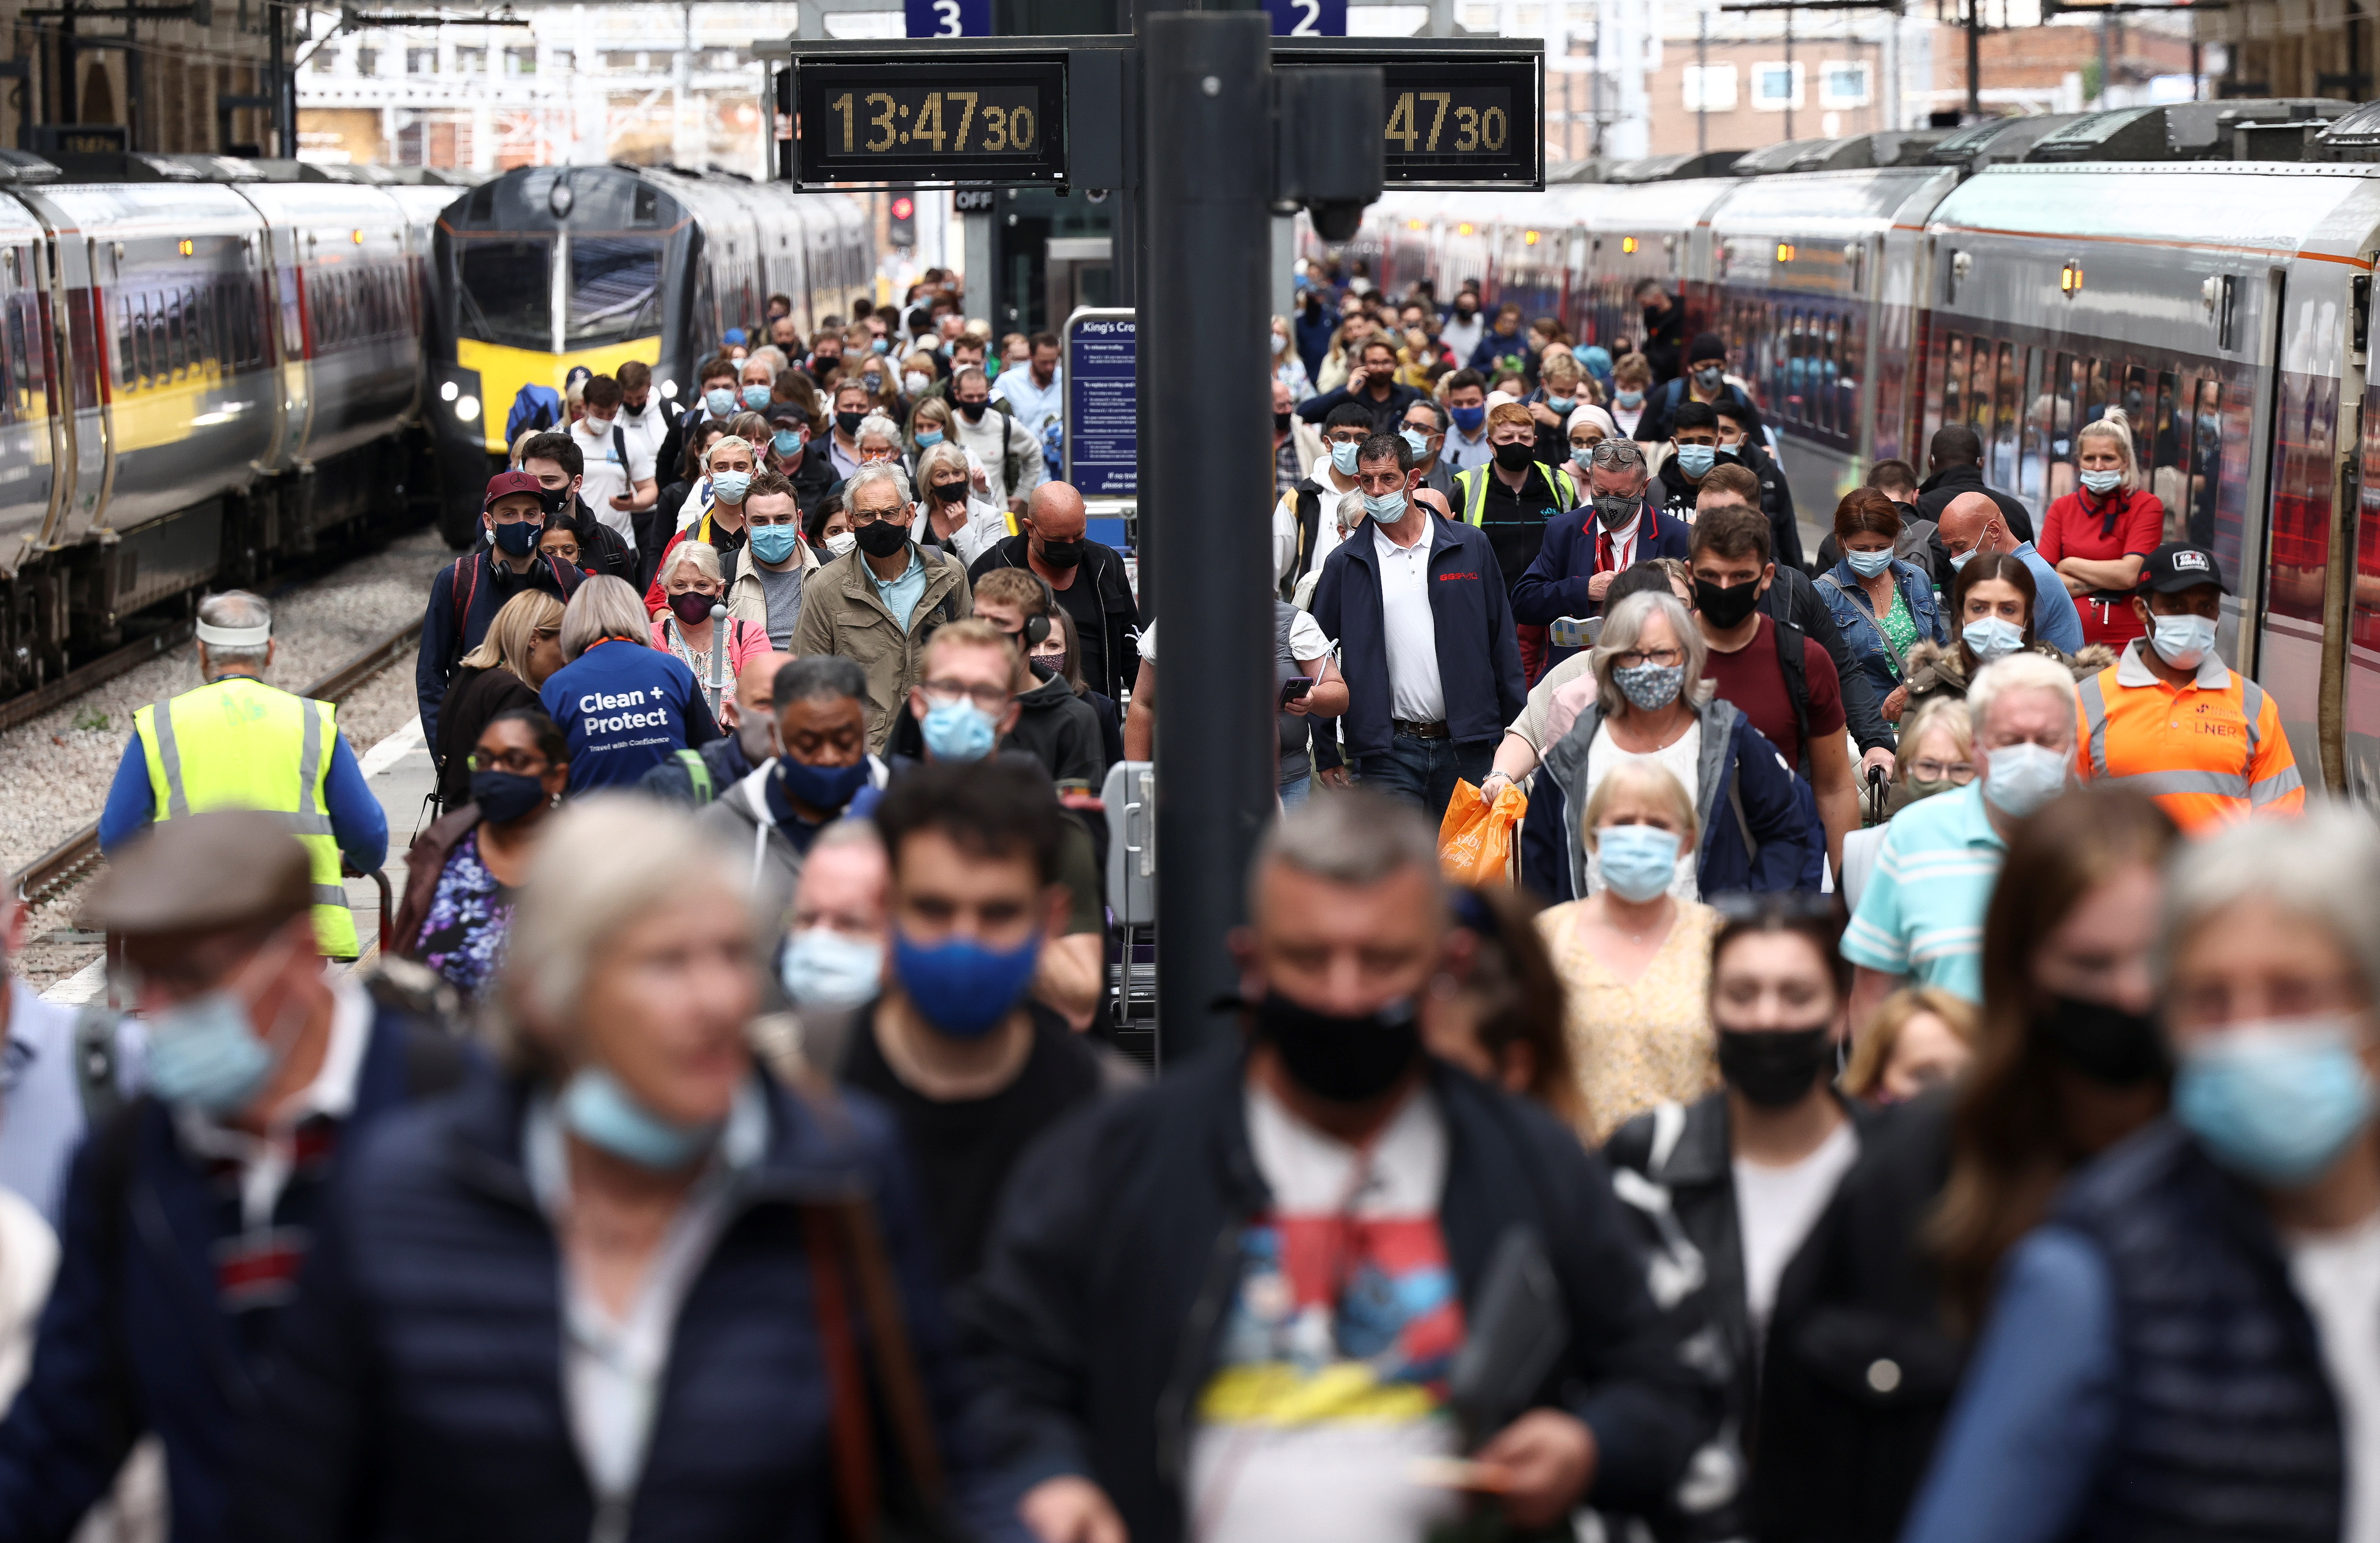 People wearing protective face masks walk along a platform at King's Cross Station, amid the coronavirus disease (COVID-19) outbreak in London